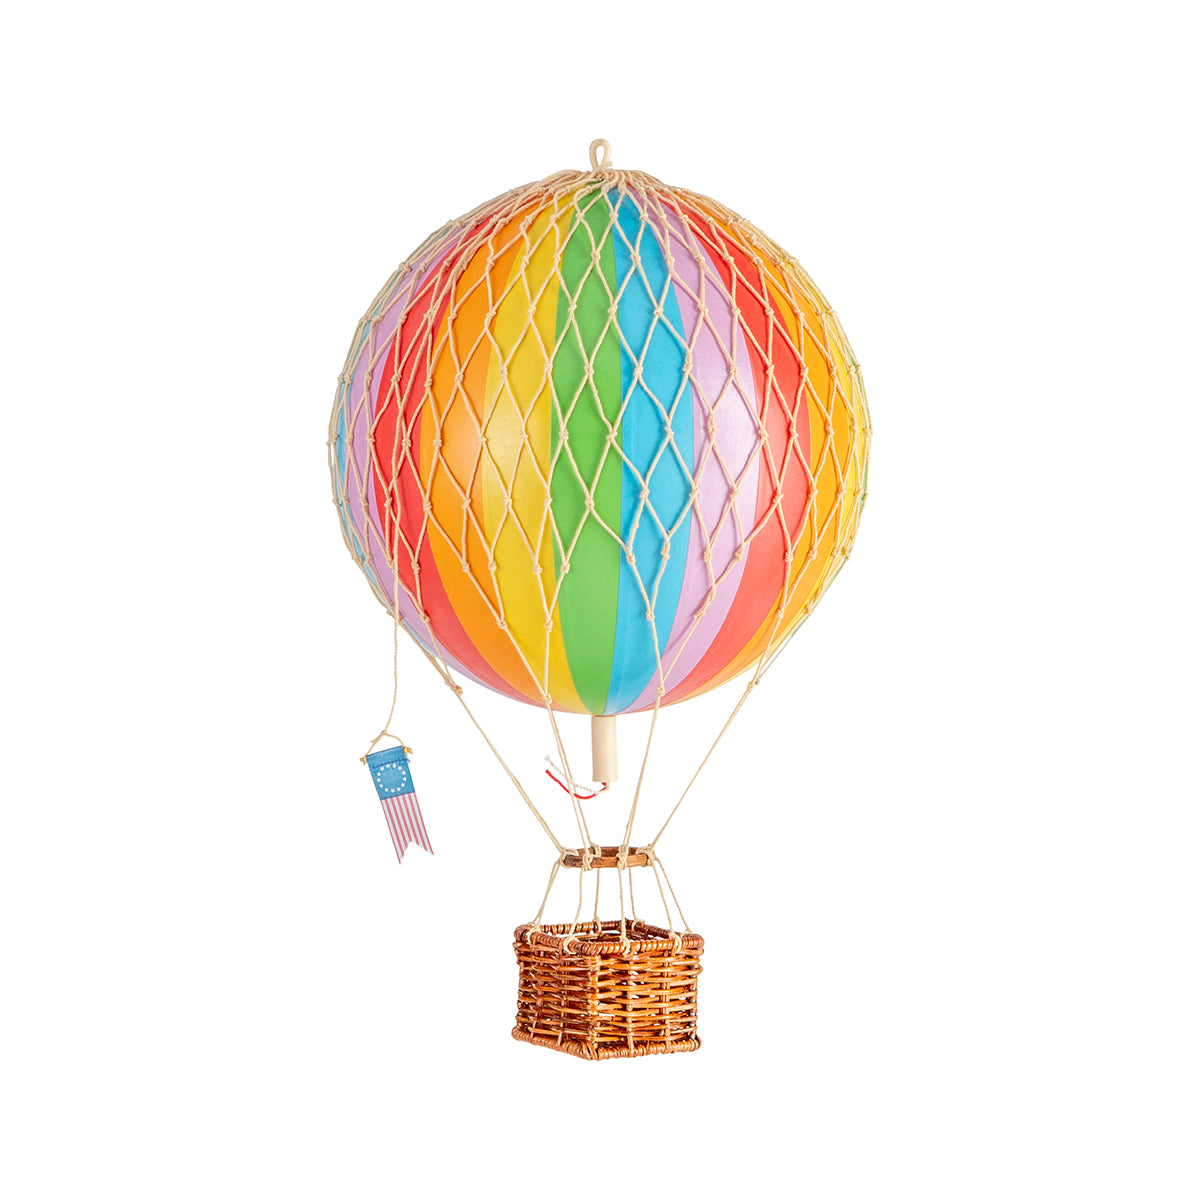 A quirky Wonderen Small Hot Air Balloon - Travels Light with a basket, infused with colorful science.